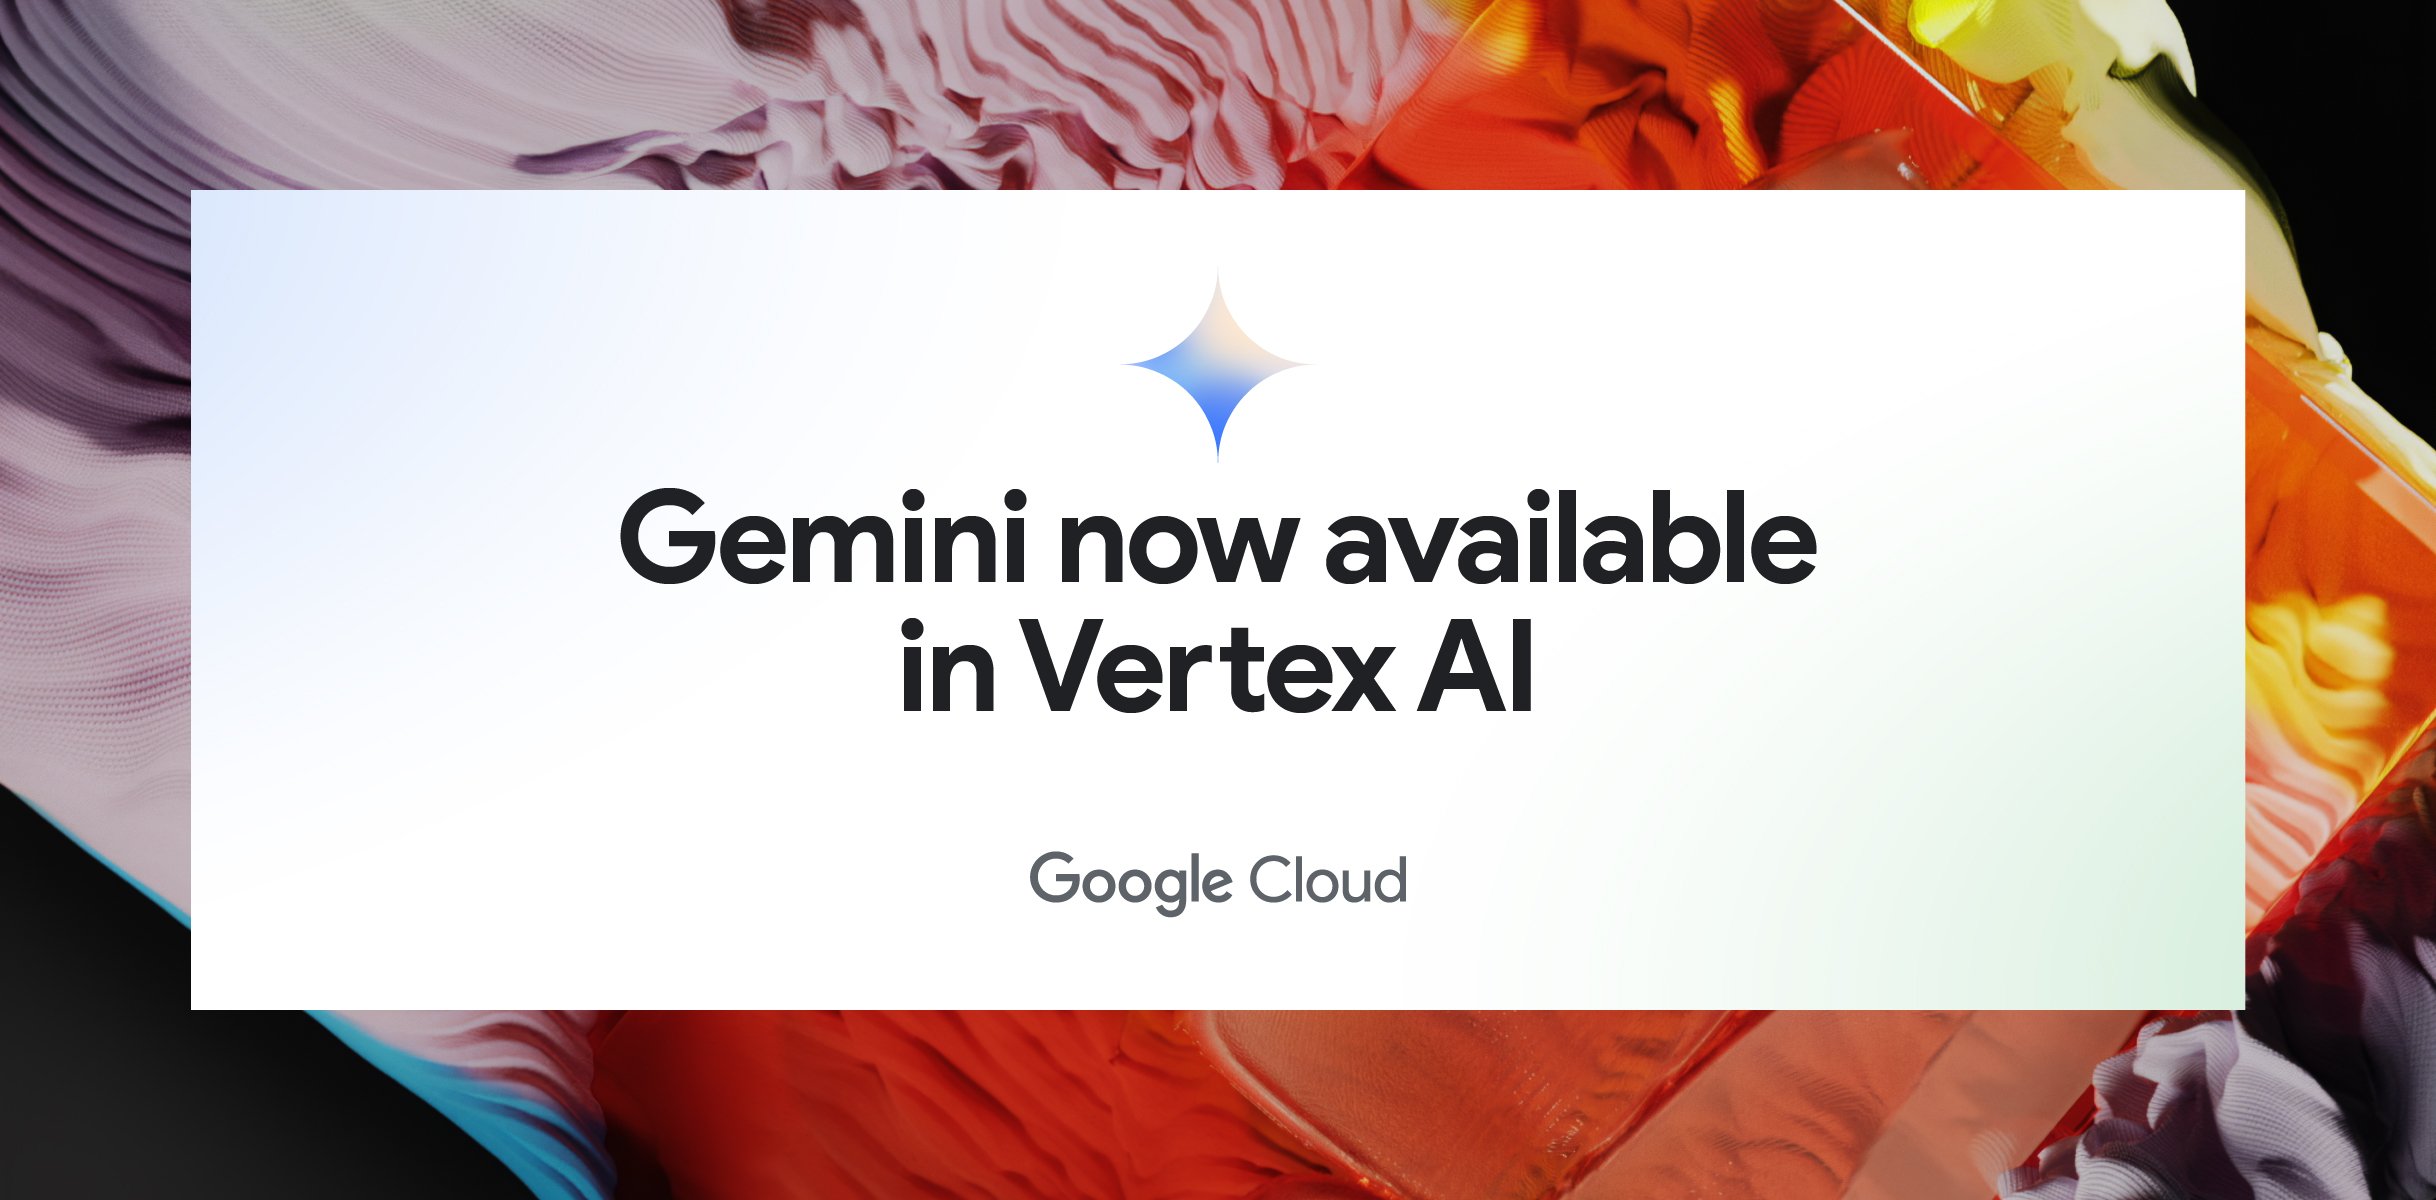 Gemini, Google’s most capable model, is now available on Vertex AI